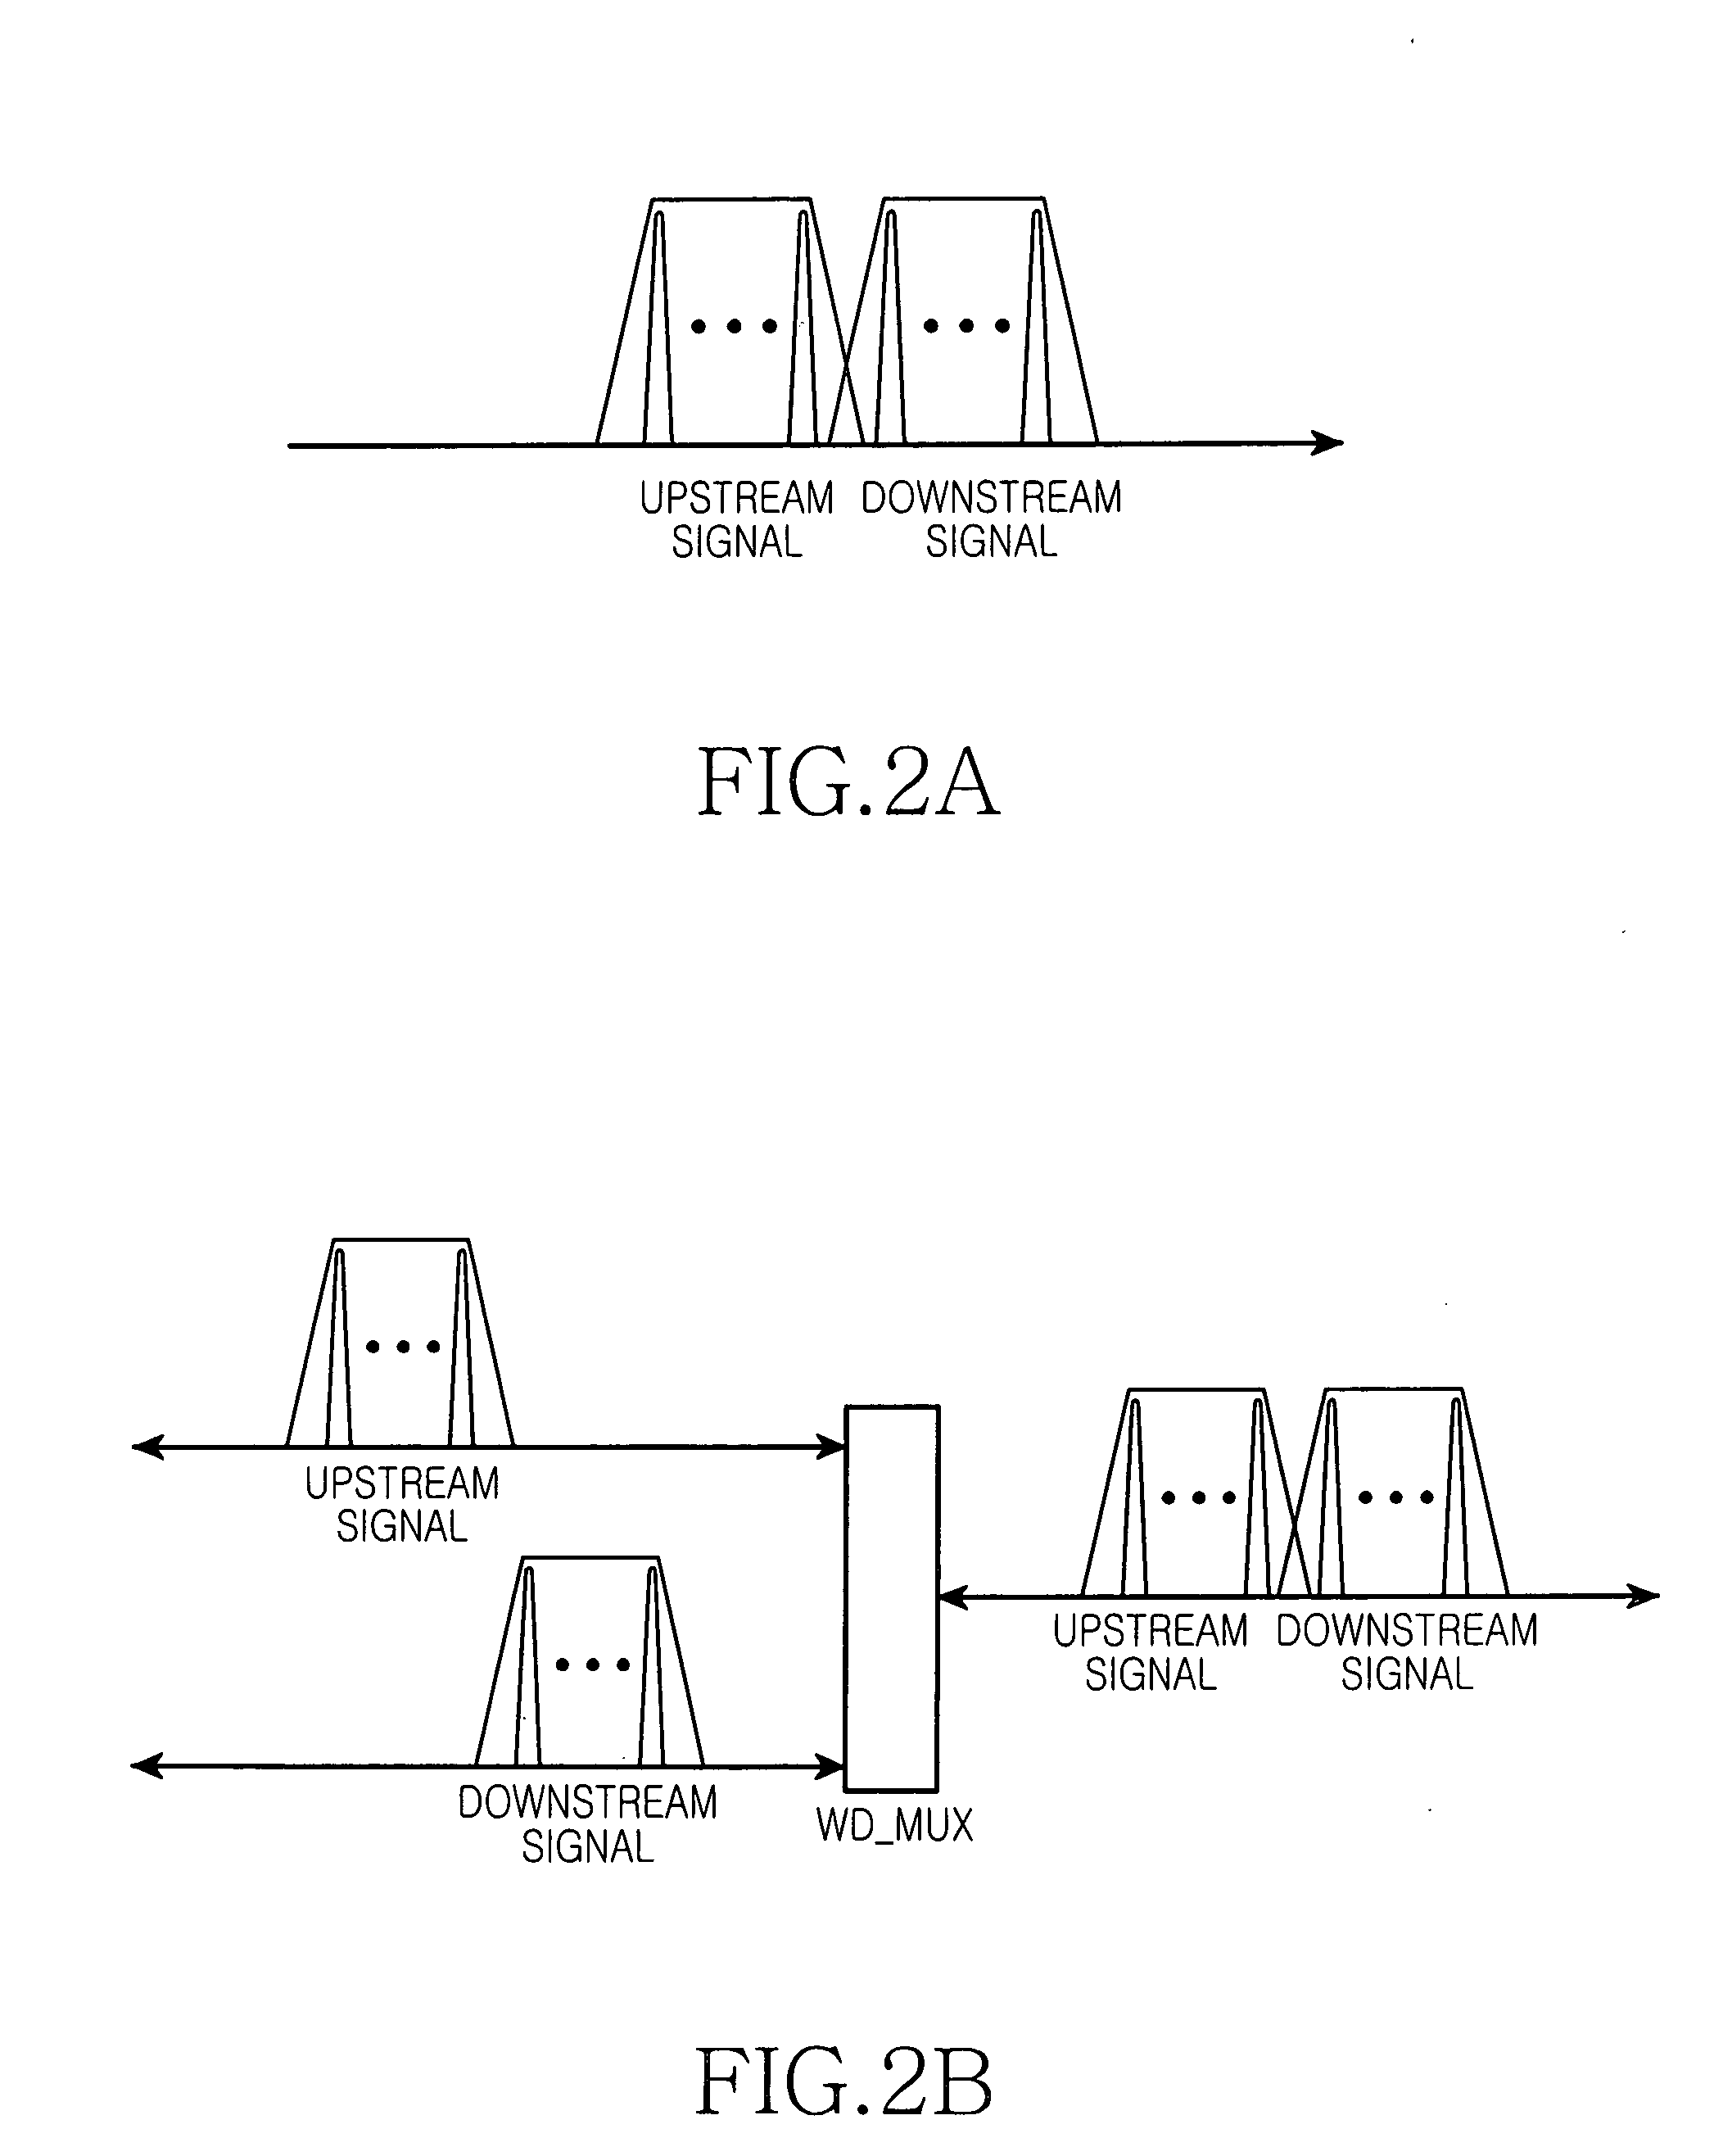 Wavelength-division-multiplexed passive optical network system using wavelength-seeded light source